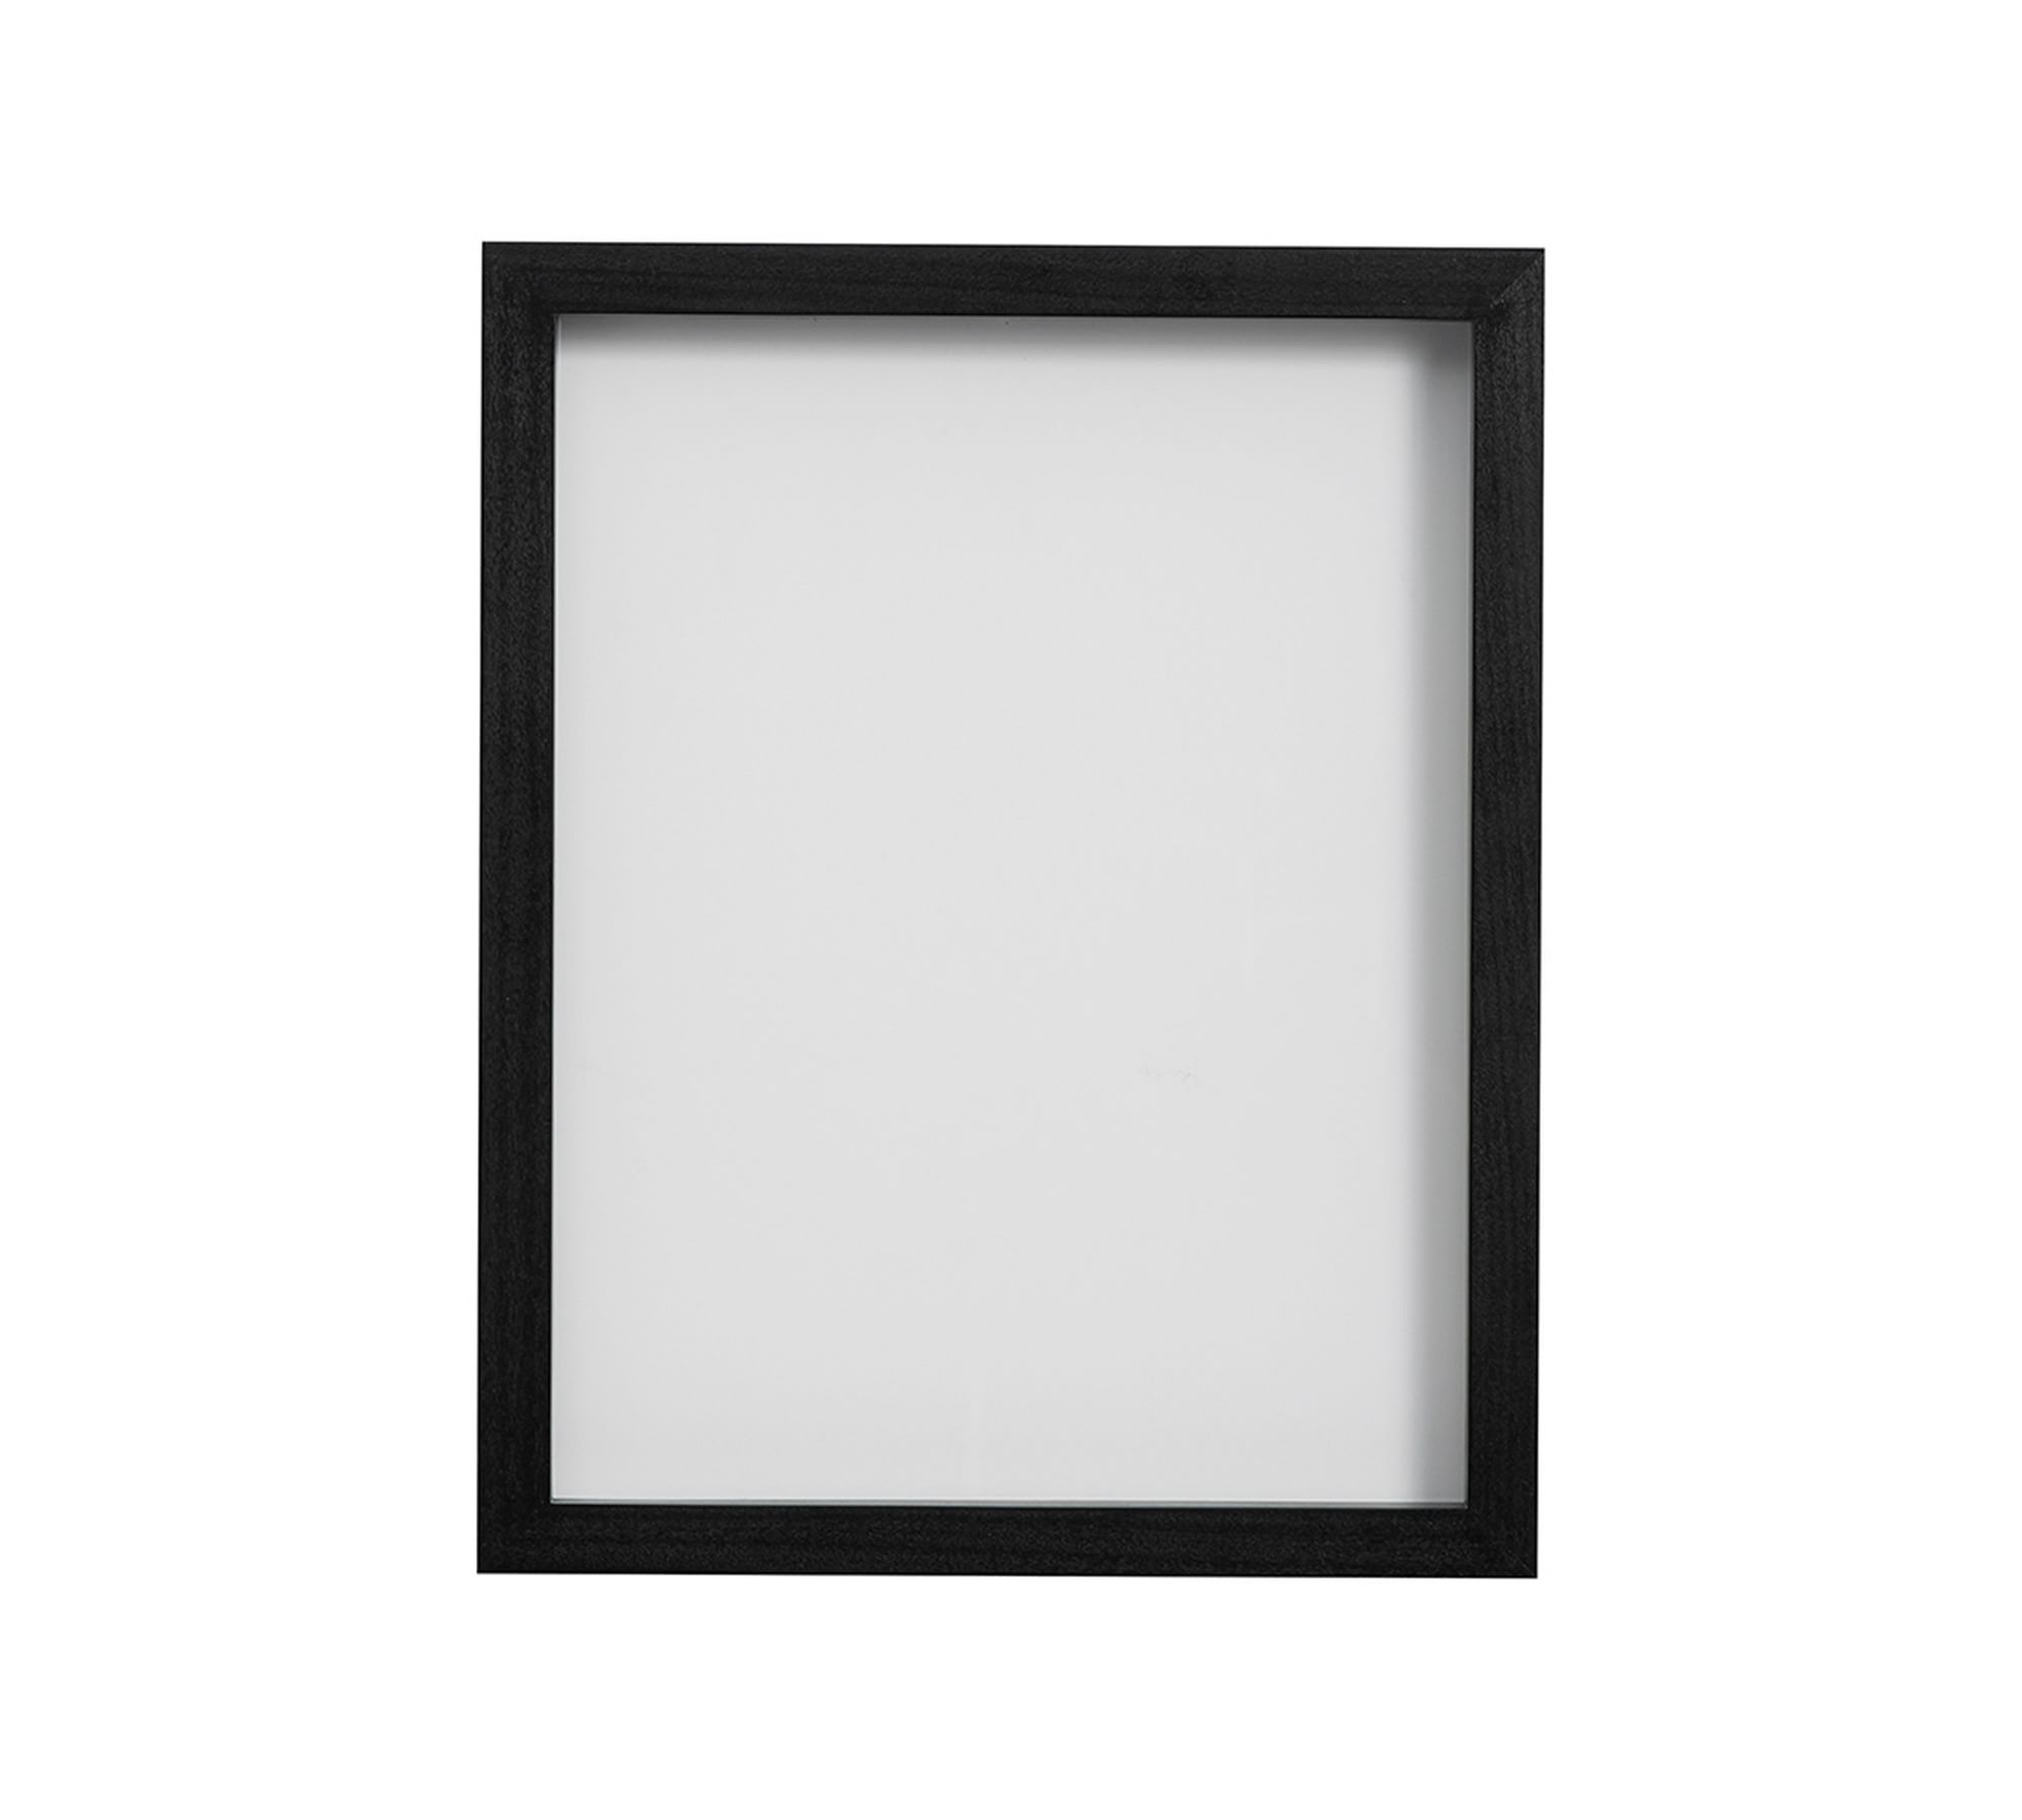 Floating Wood Gallery Frame, 11x14 (12x15 overall) - Black - Pottery Barn